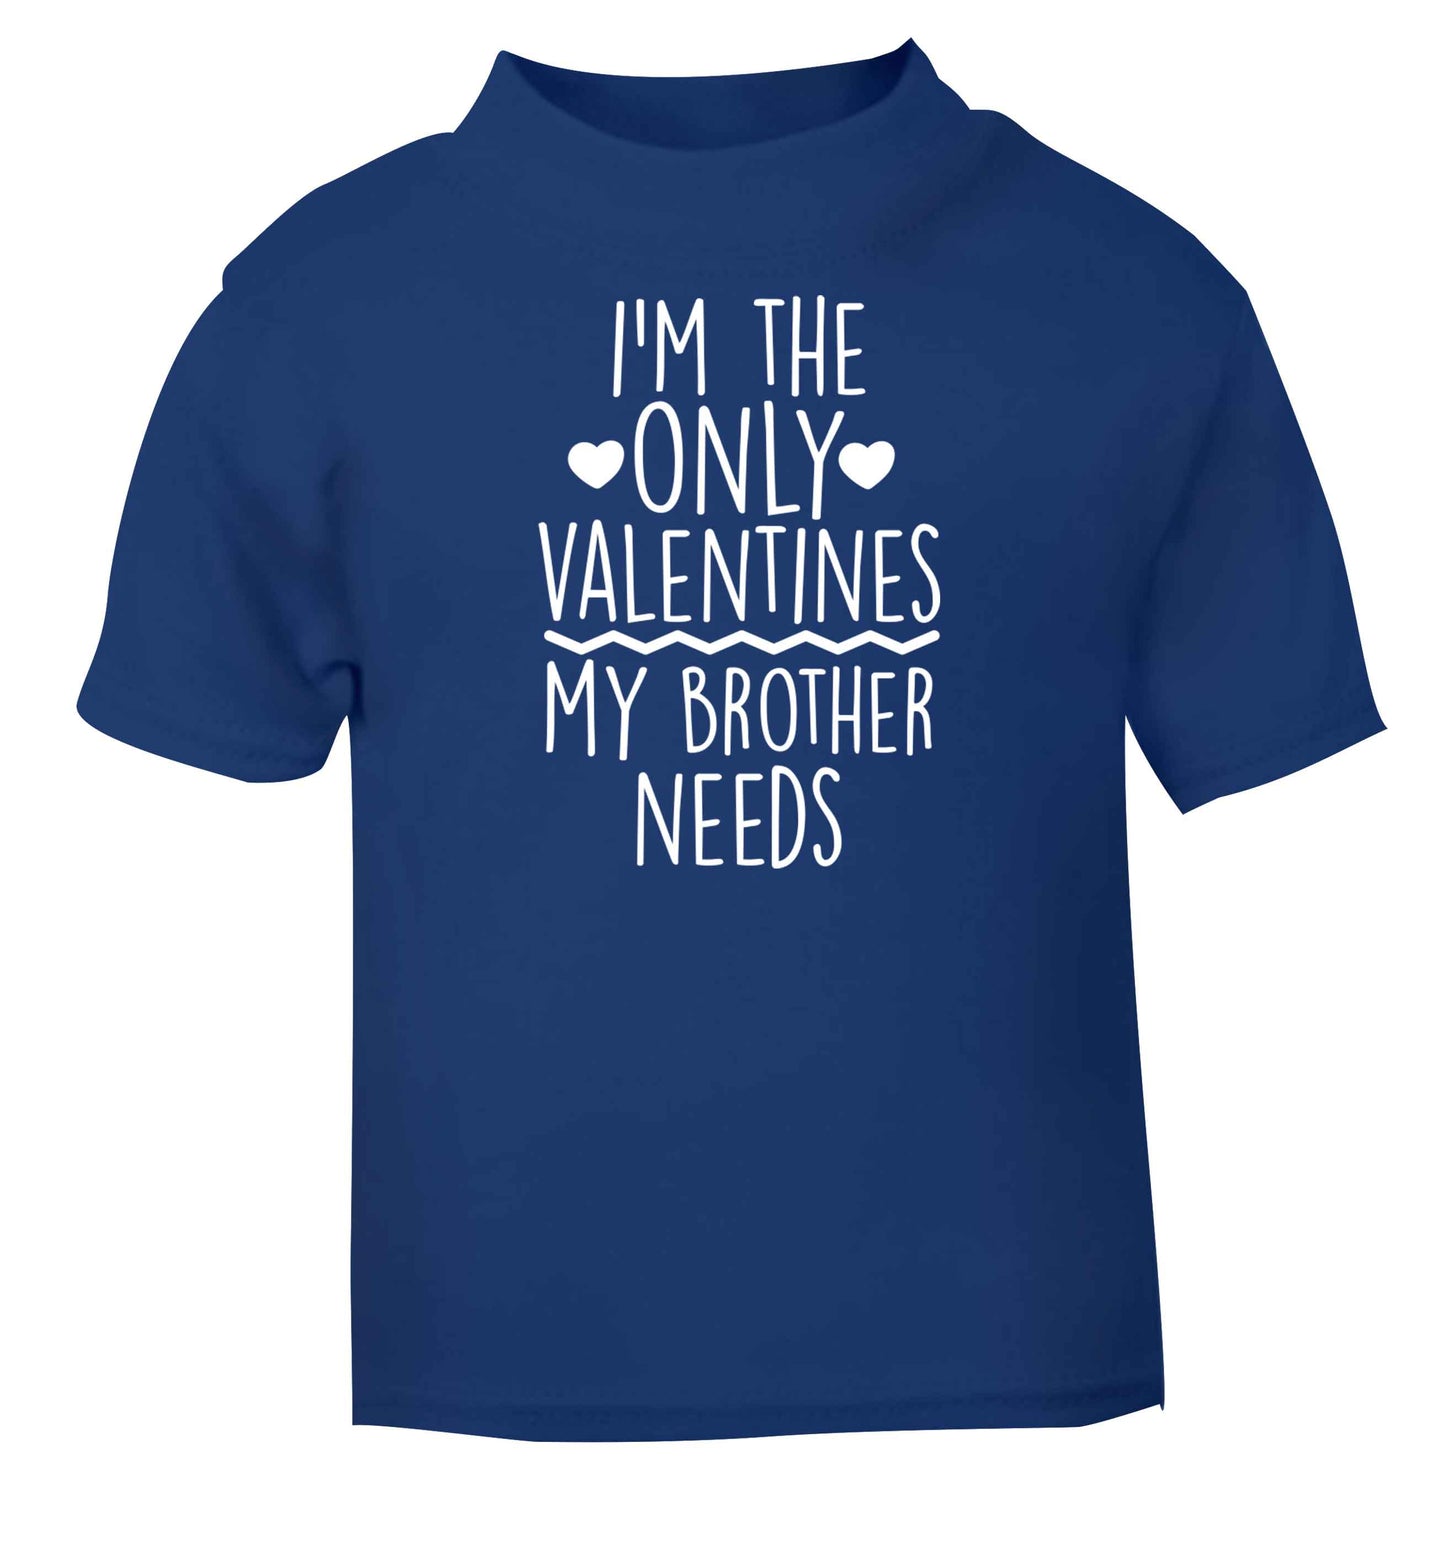 I'm the only valentines my brother needs blue baby toddler Tshirt 2 Years